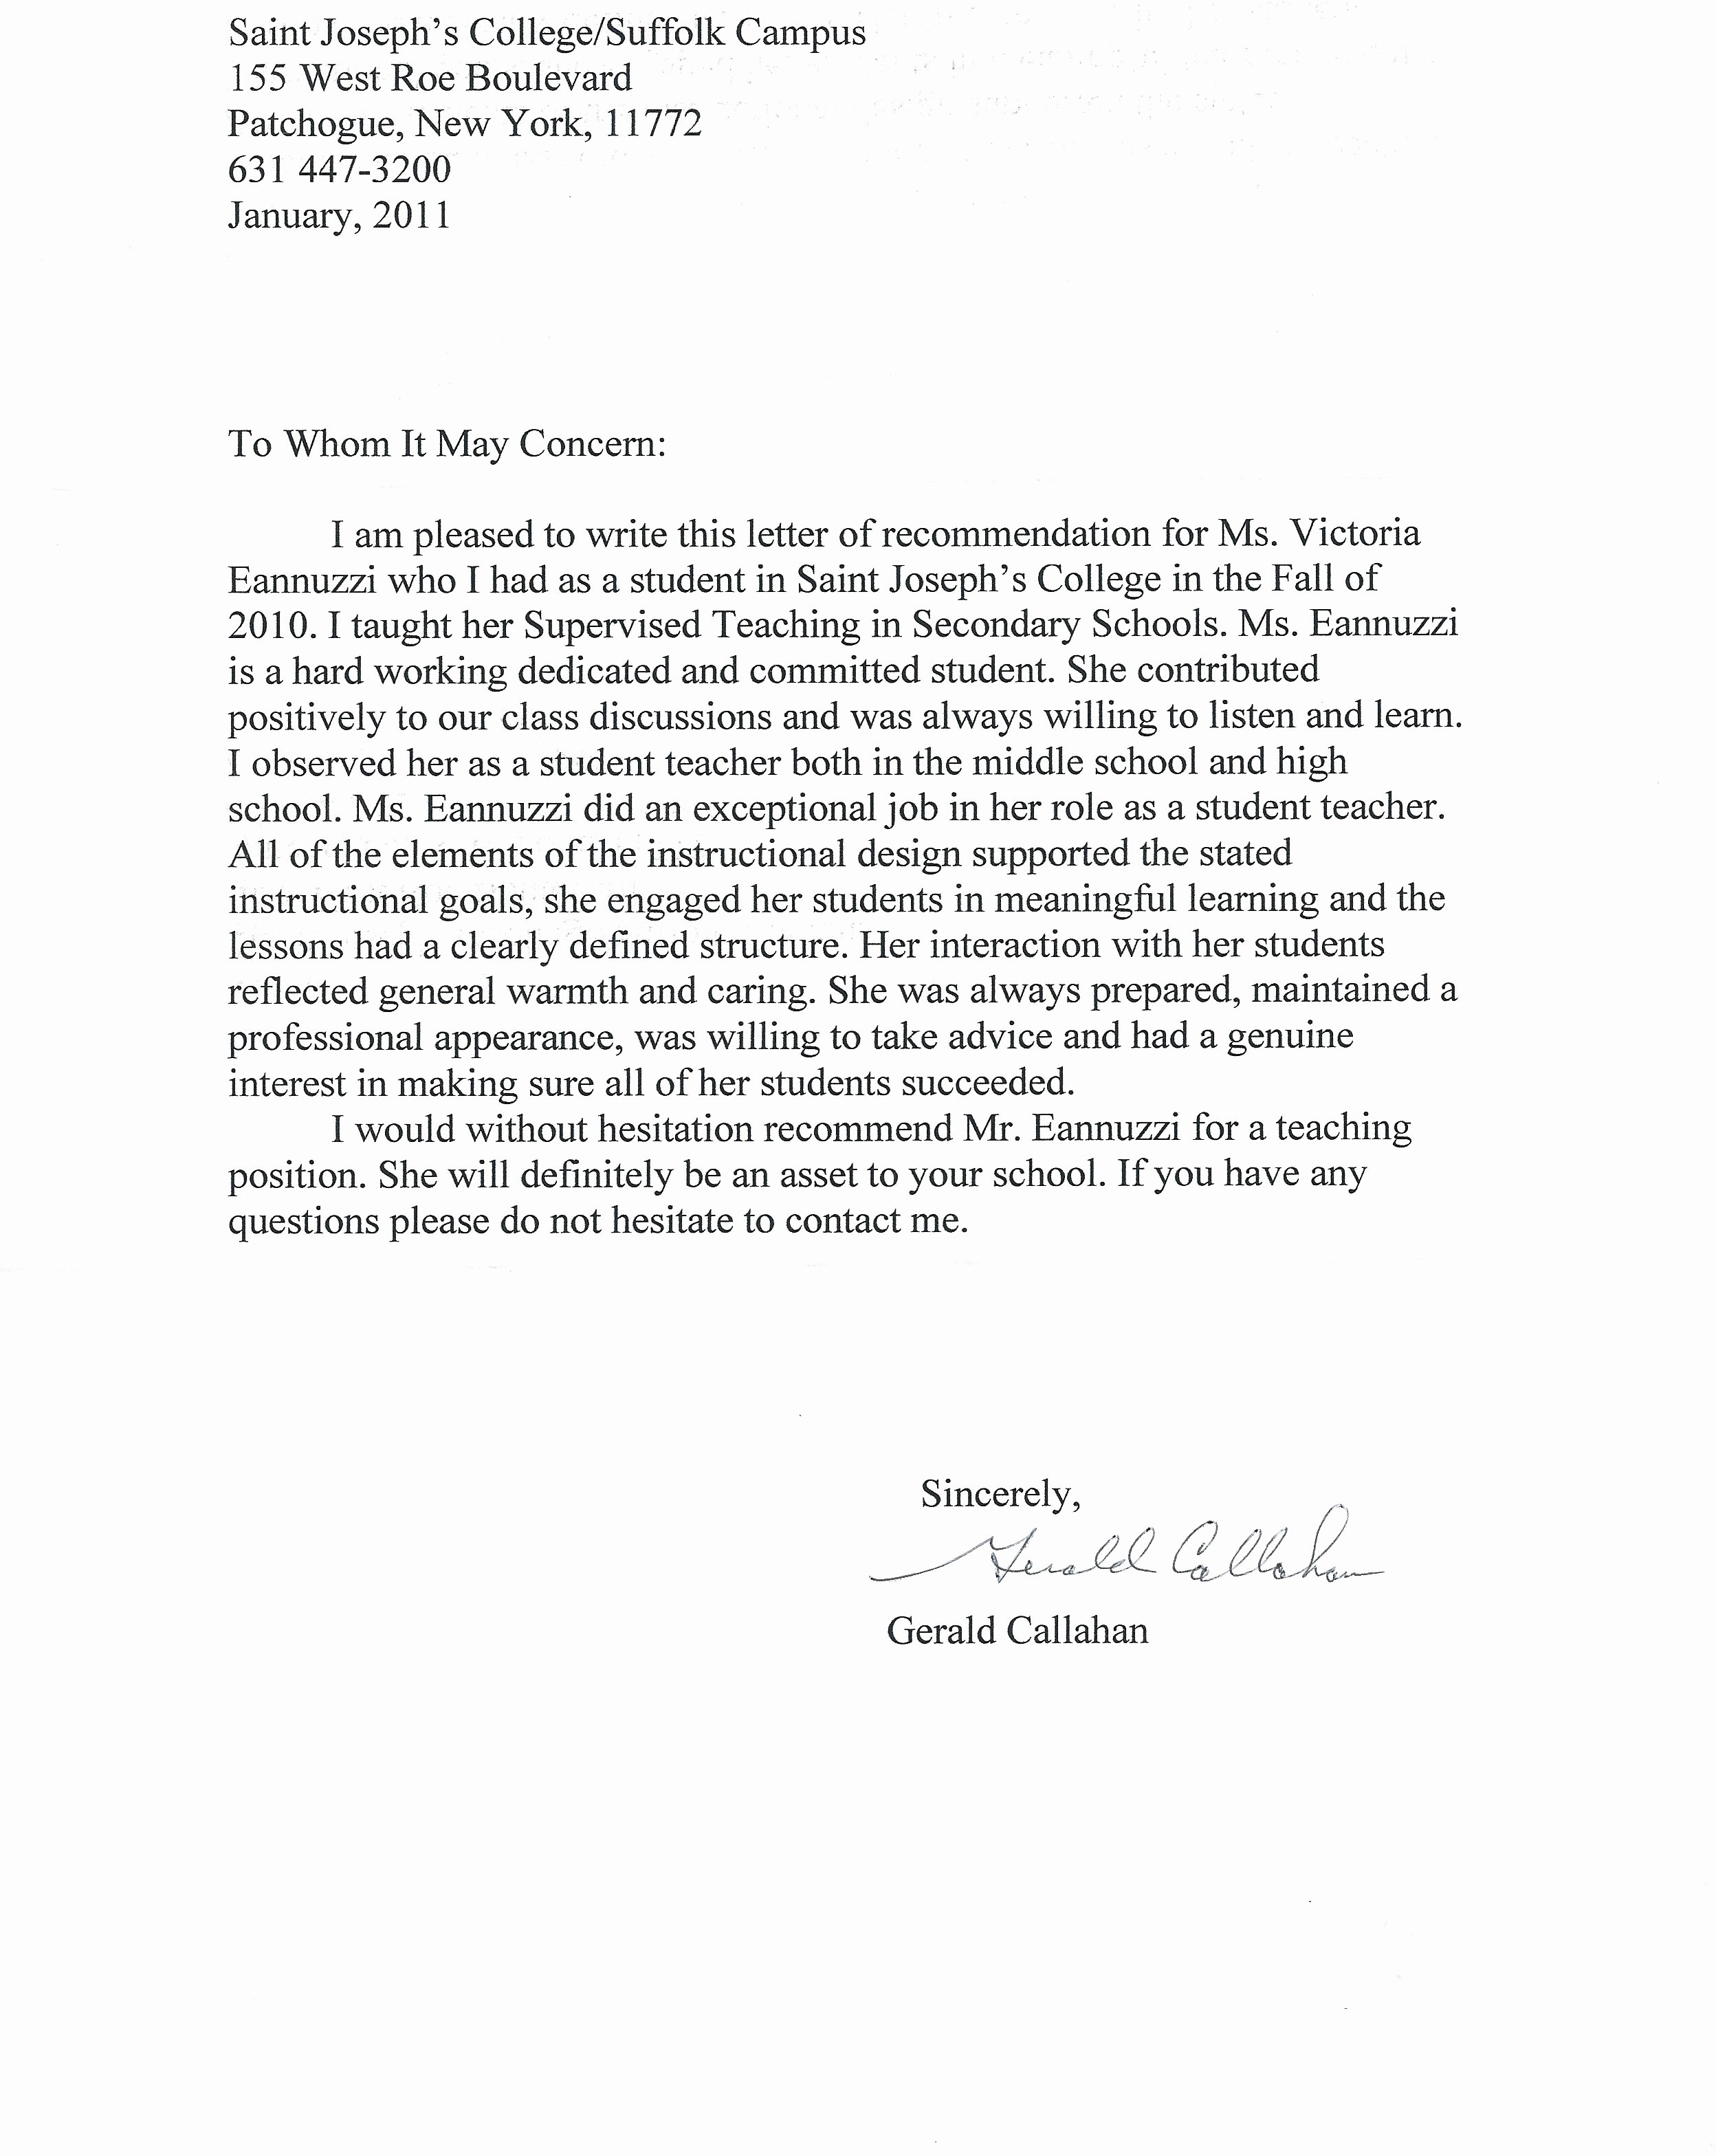 Letter Of Recommendation From Coworker Elegant Victoria Anne Eannuzzi My Teaching Portfolio